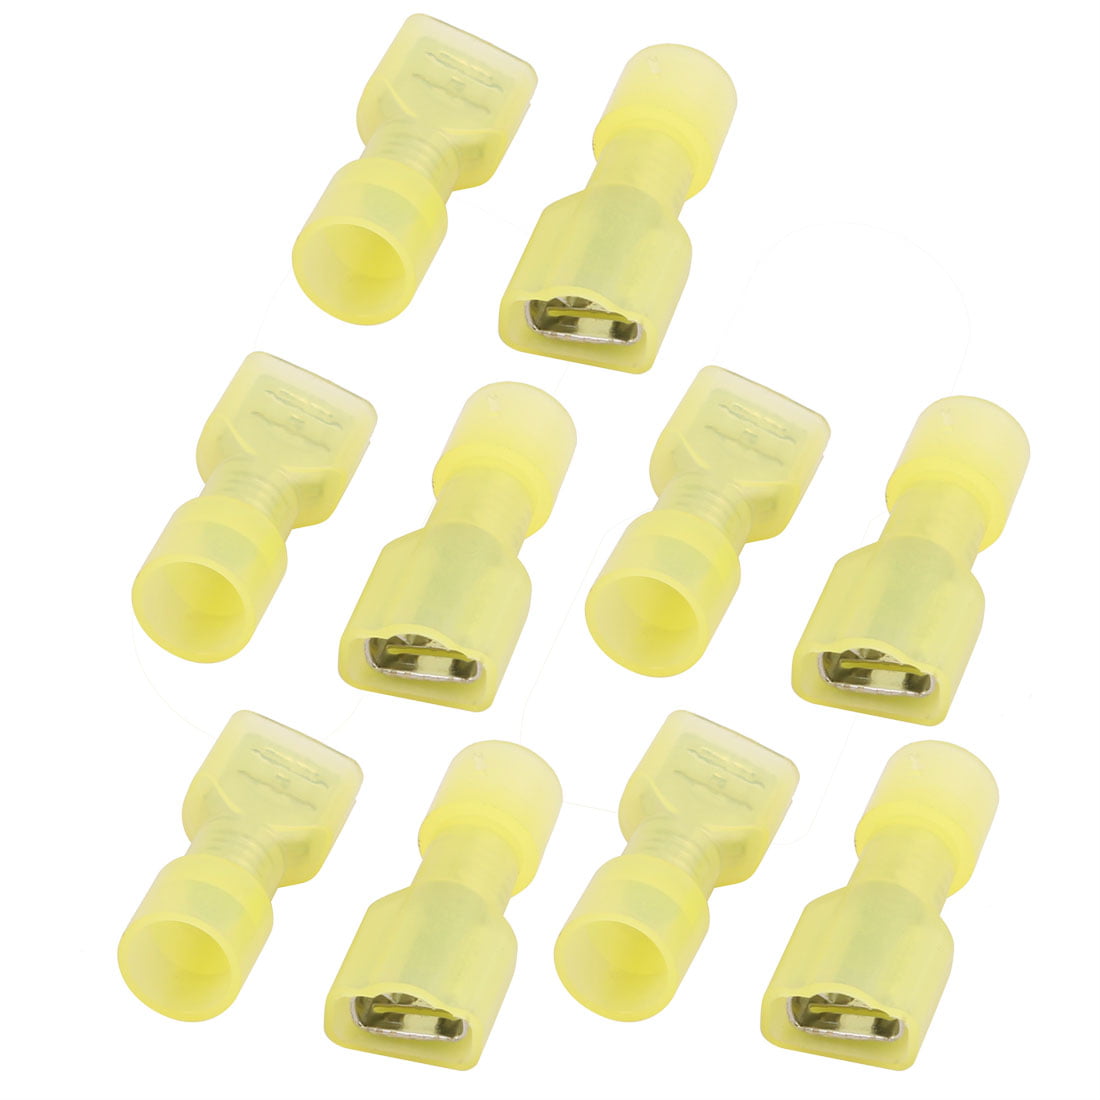 50 x Yellow 6.3mm Female Fully Insulated Crimp Spade Connector 